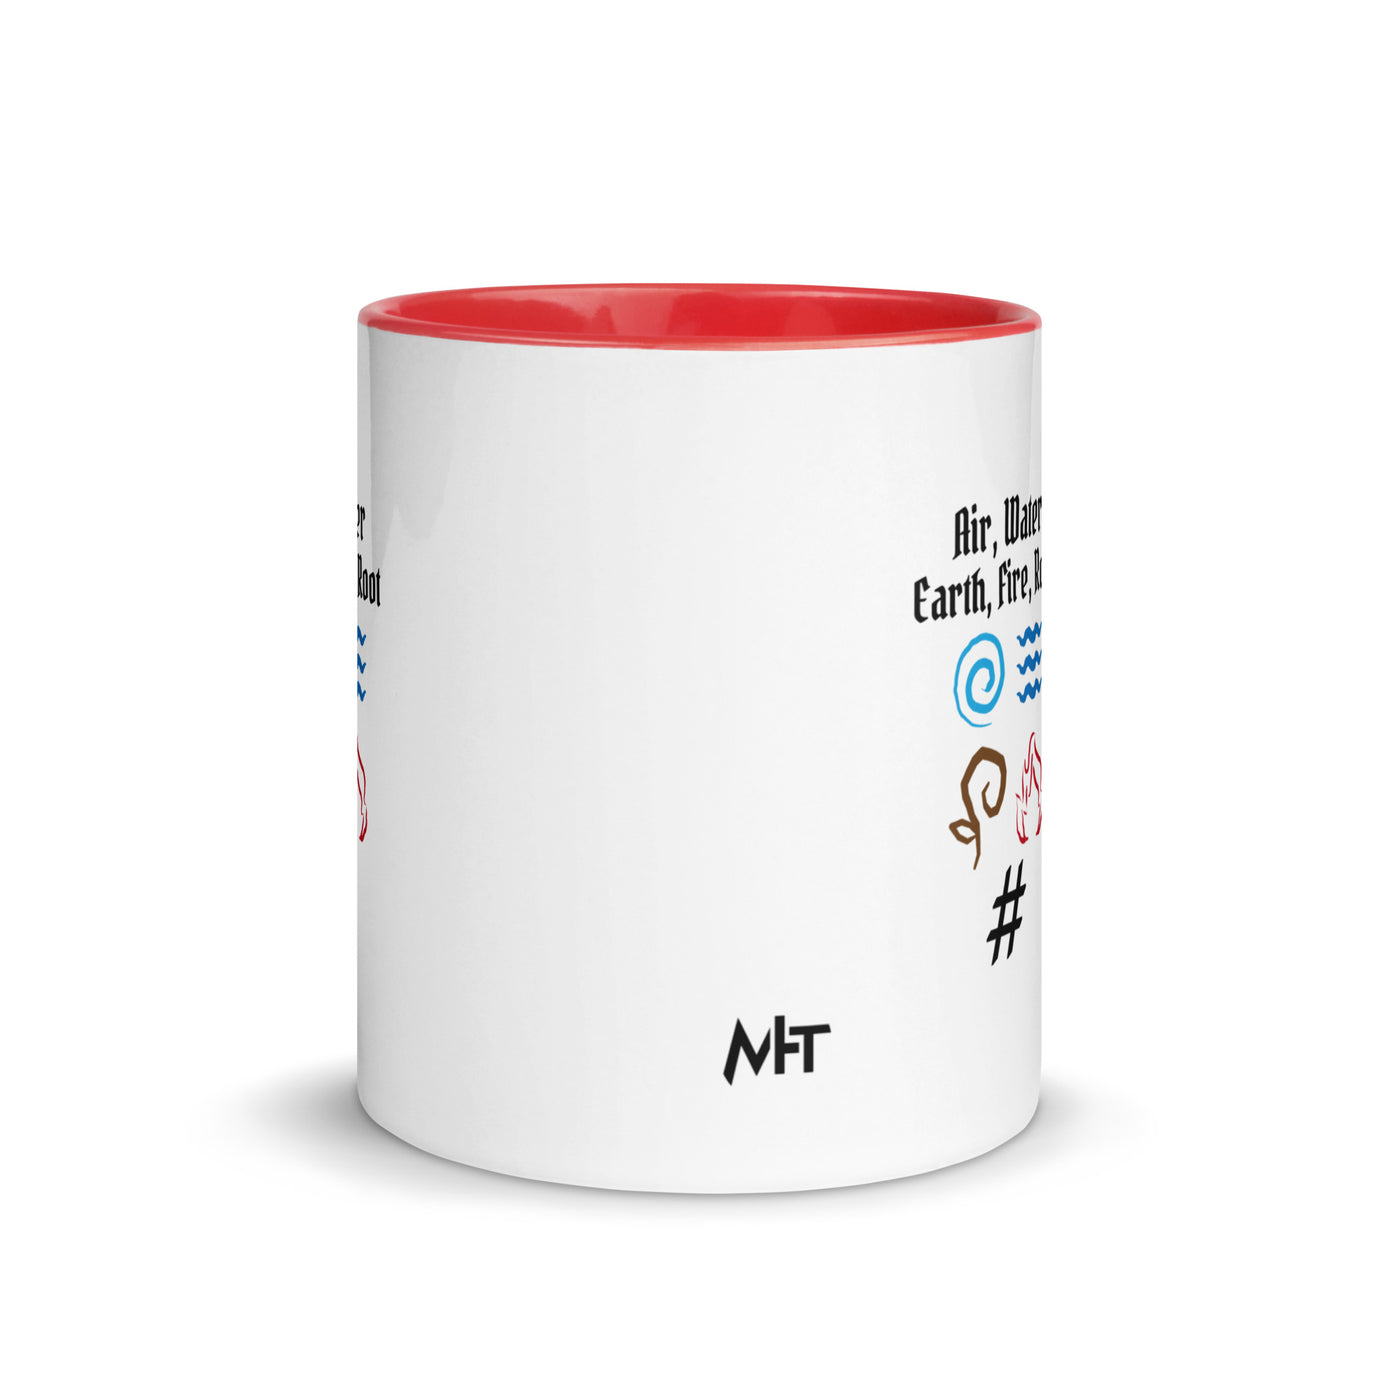 Air, Water, Earth, Fire, Root - Mug with Color Inside